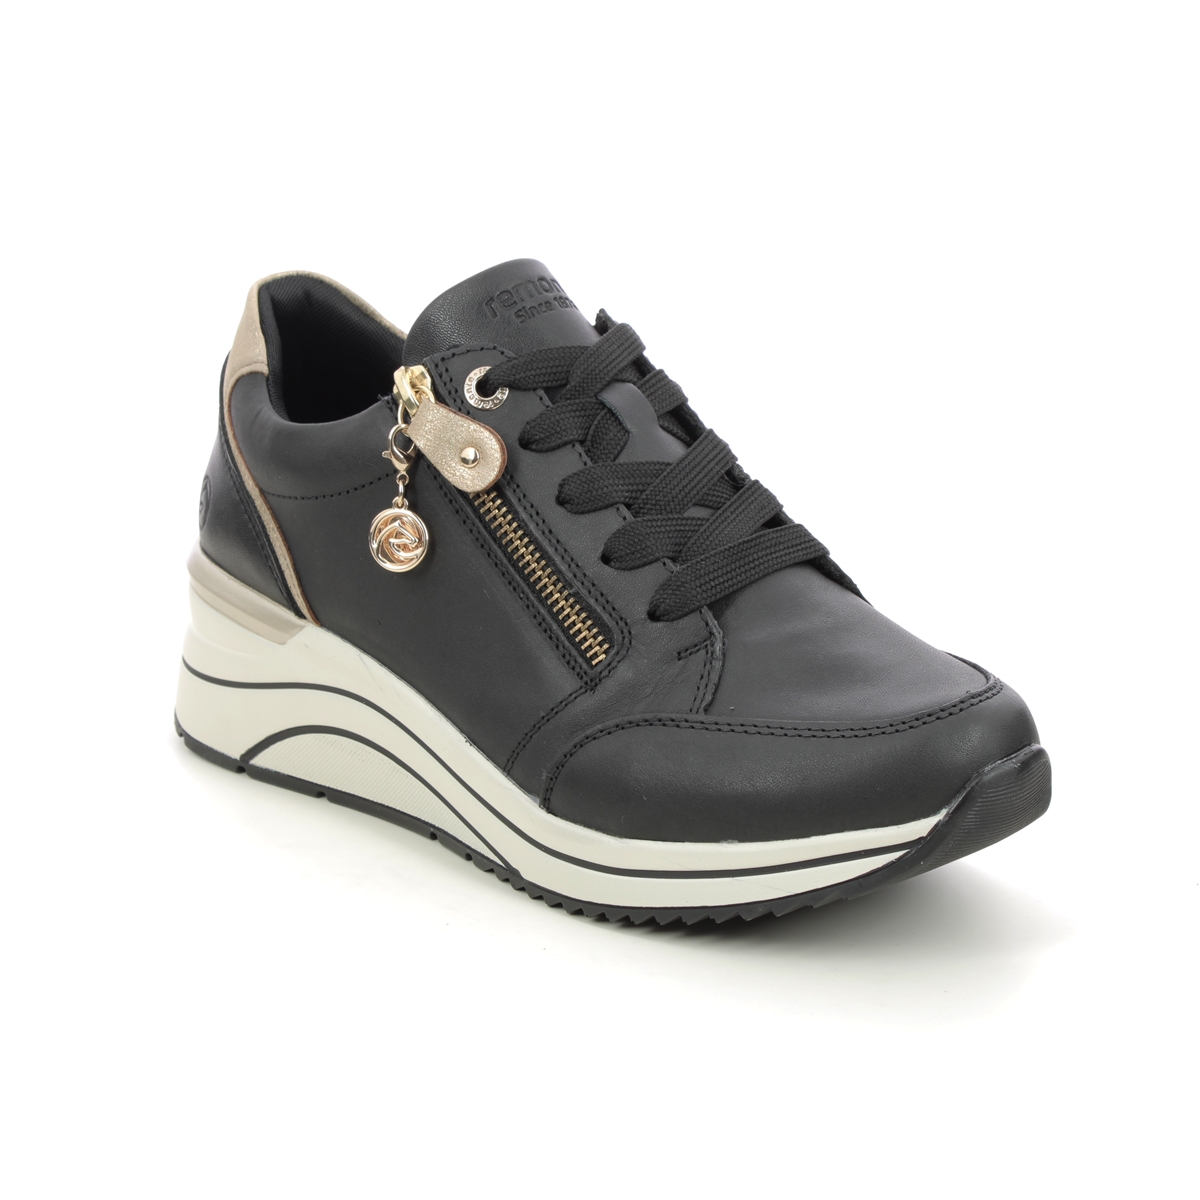 Remonte Ranzip Wedge Black Leather Womens Trainers D0T03-01 In Size 41 In Plain Black Leather